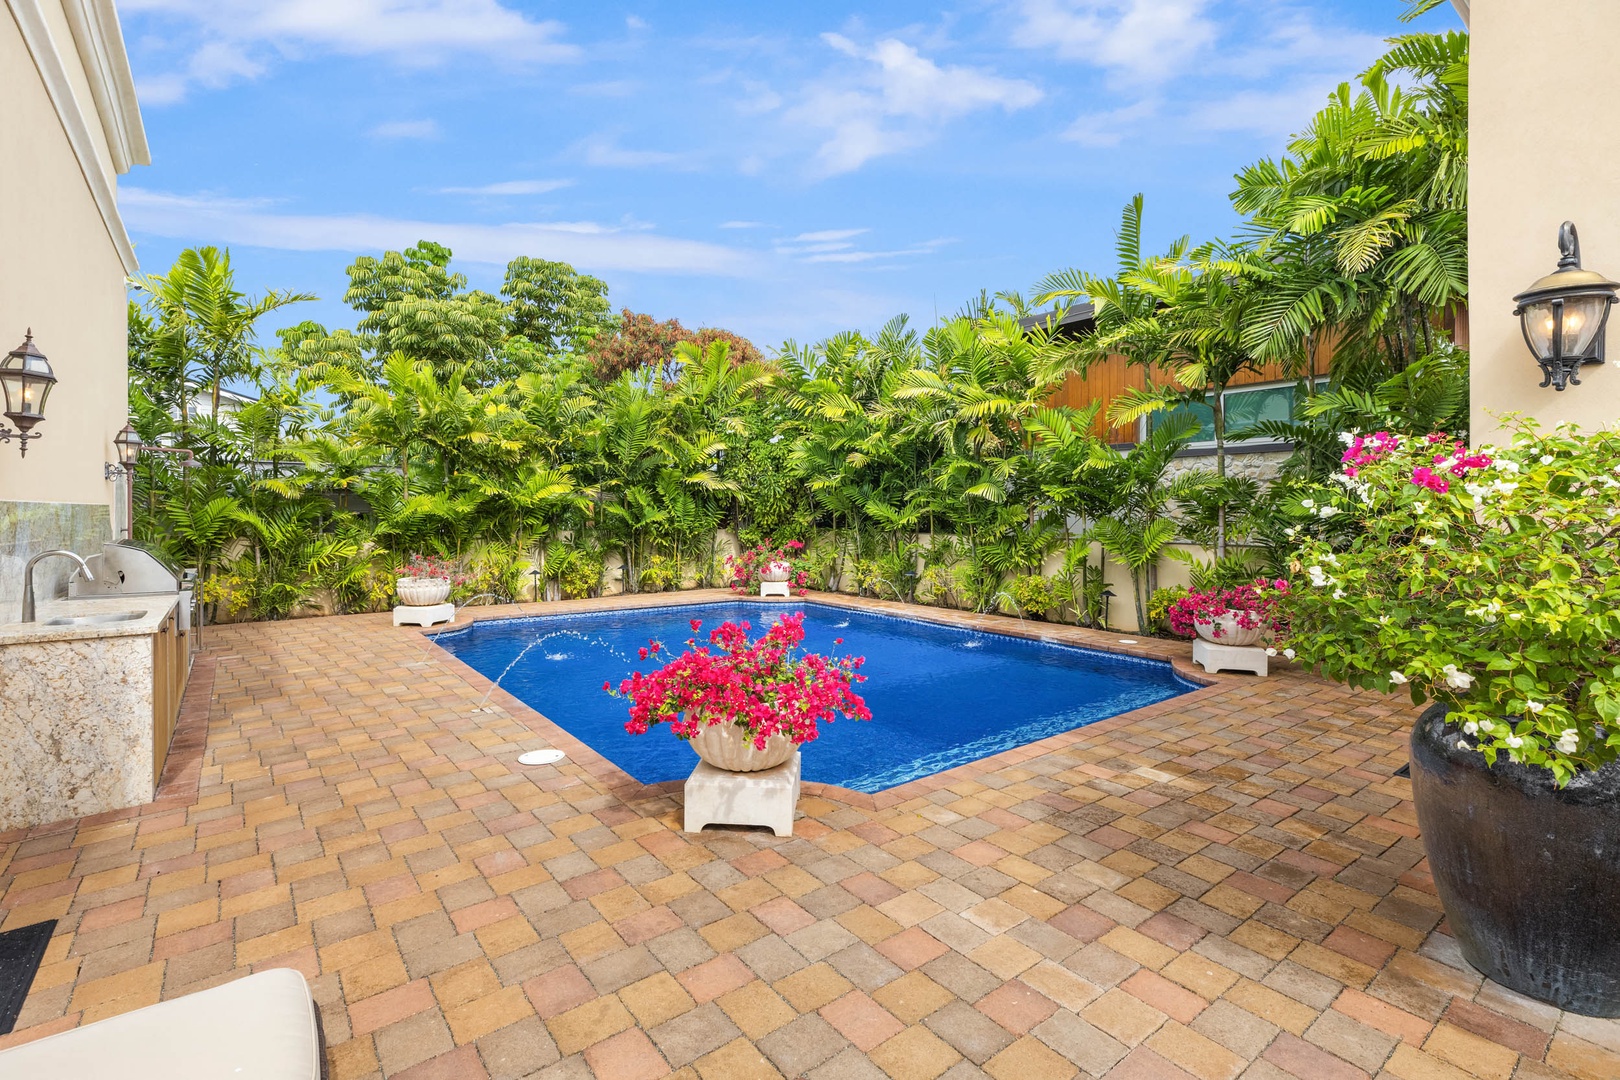 Honolulu Vacation Rentals, The Kahala Mansion - Private pool flanked by vibrant tropical flowers.